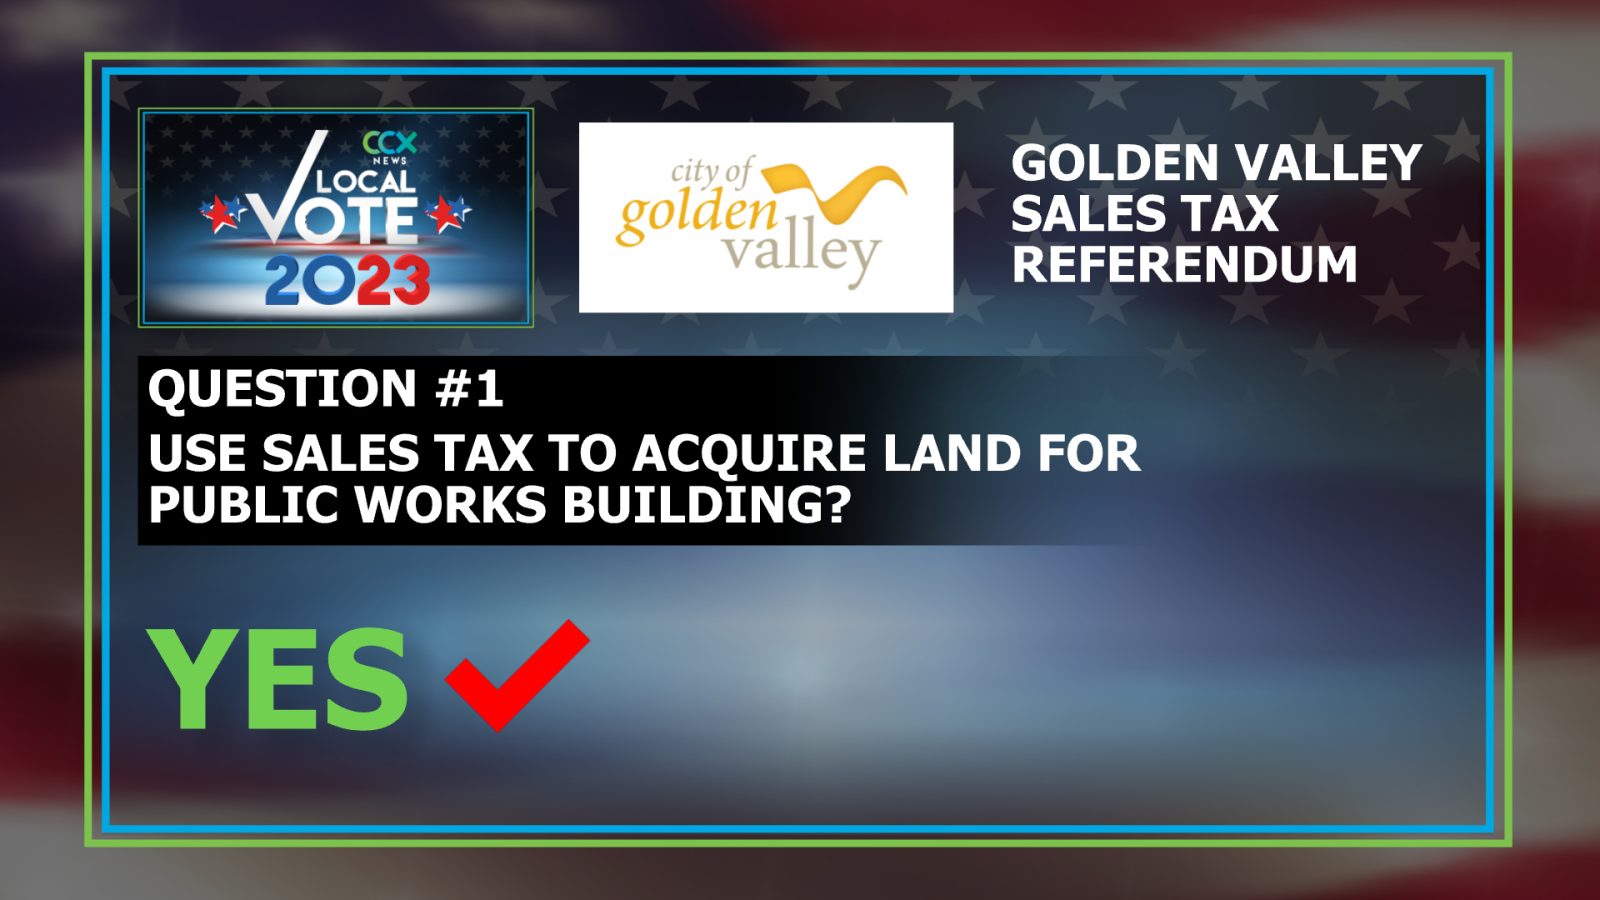 Golden Valley voters approve sales tax increase for public construction projects